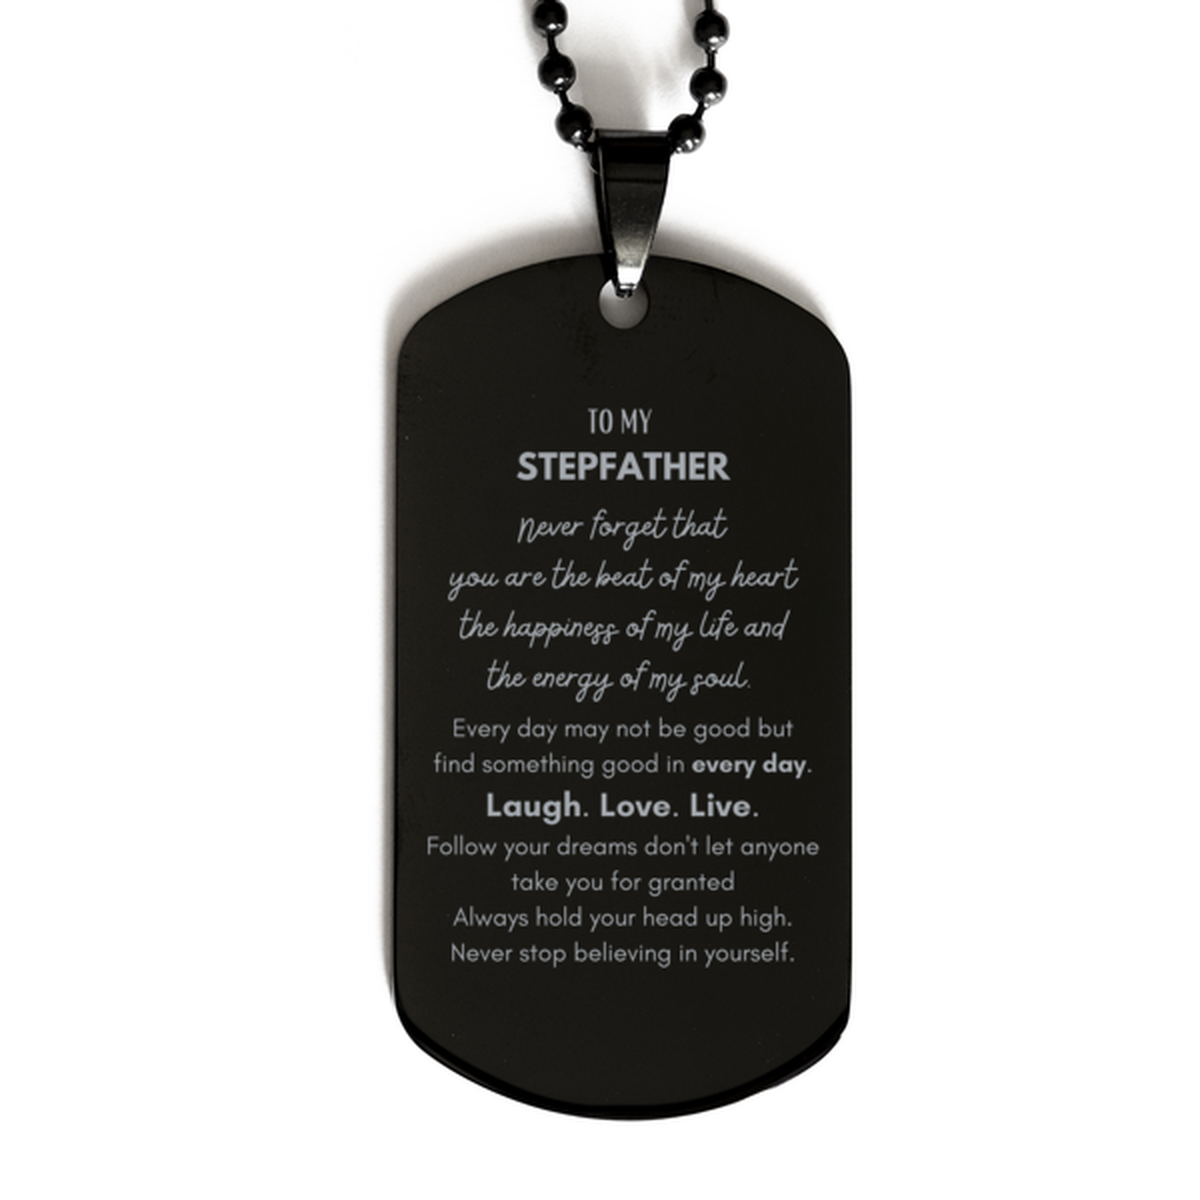 To My Stepfather Dogtag Gifts, Christmas Stepfather Black Dog Tag Present, Birthday Unique Motivational For Stepfather, To My Stepfather Never forget that you are the beat of my heart the happiness of my life and the energy of my soul